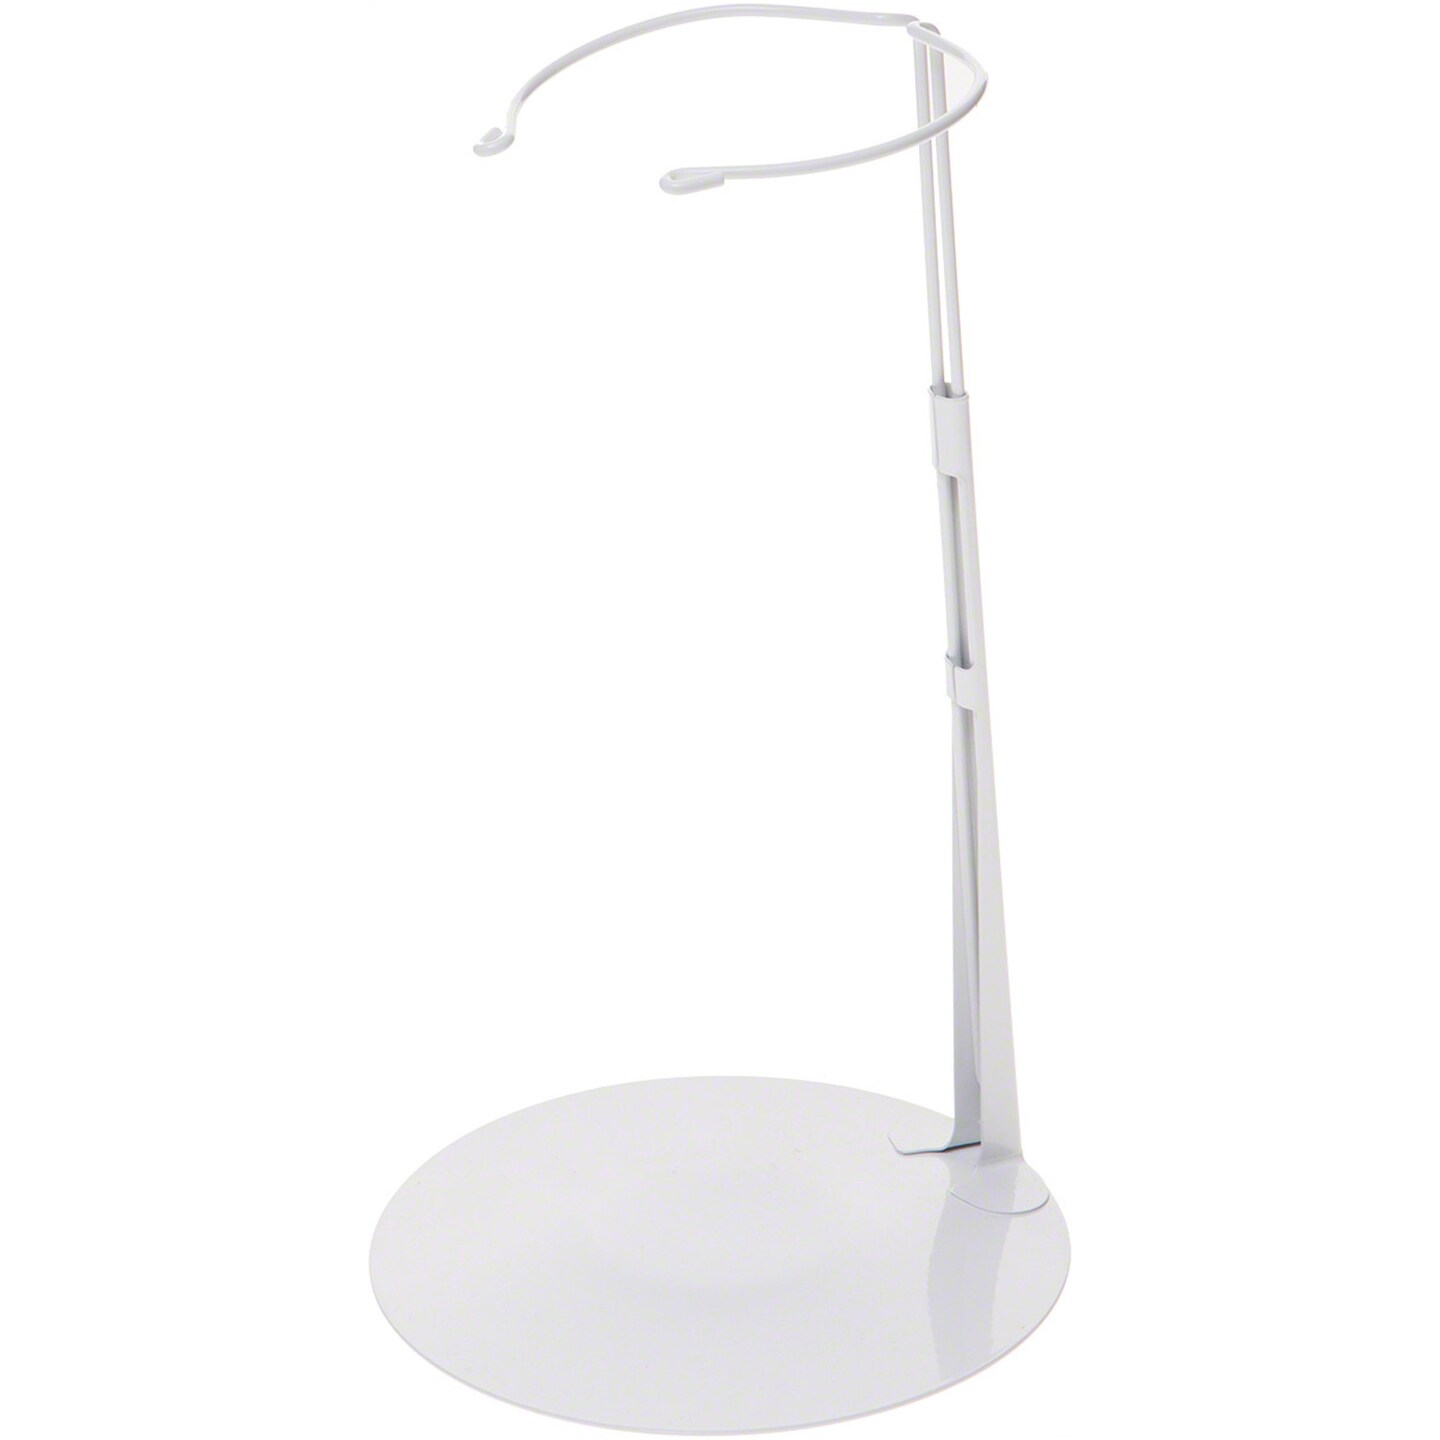 Kaiser 3701 White Adjustable Doll Stand, fits 20 to 30 inch Dolls, waist width adjusts from 4 to 4.75 inches